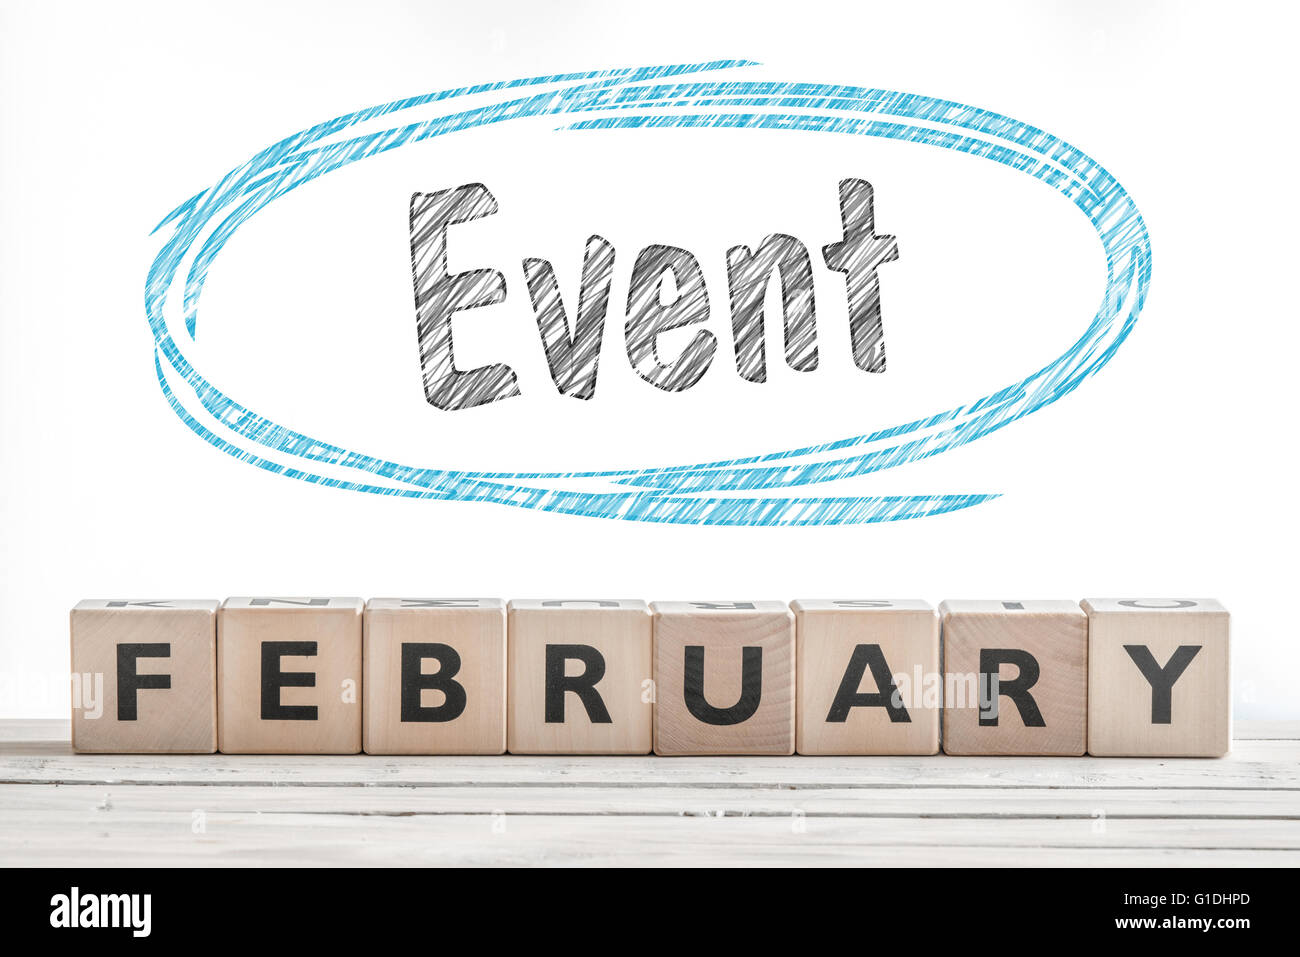 February event sign made of wood on a stage Stock Photo